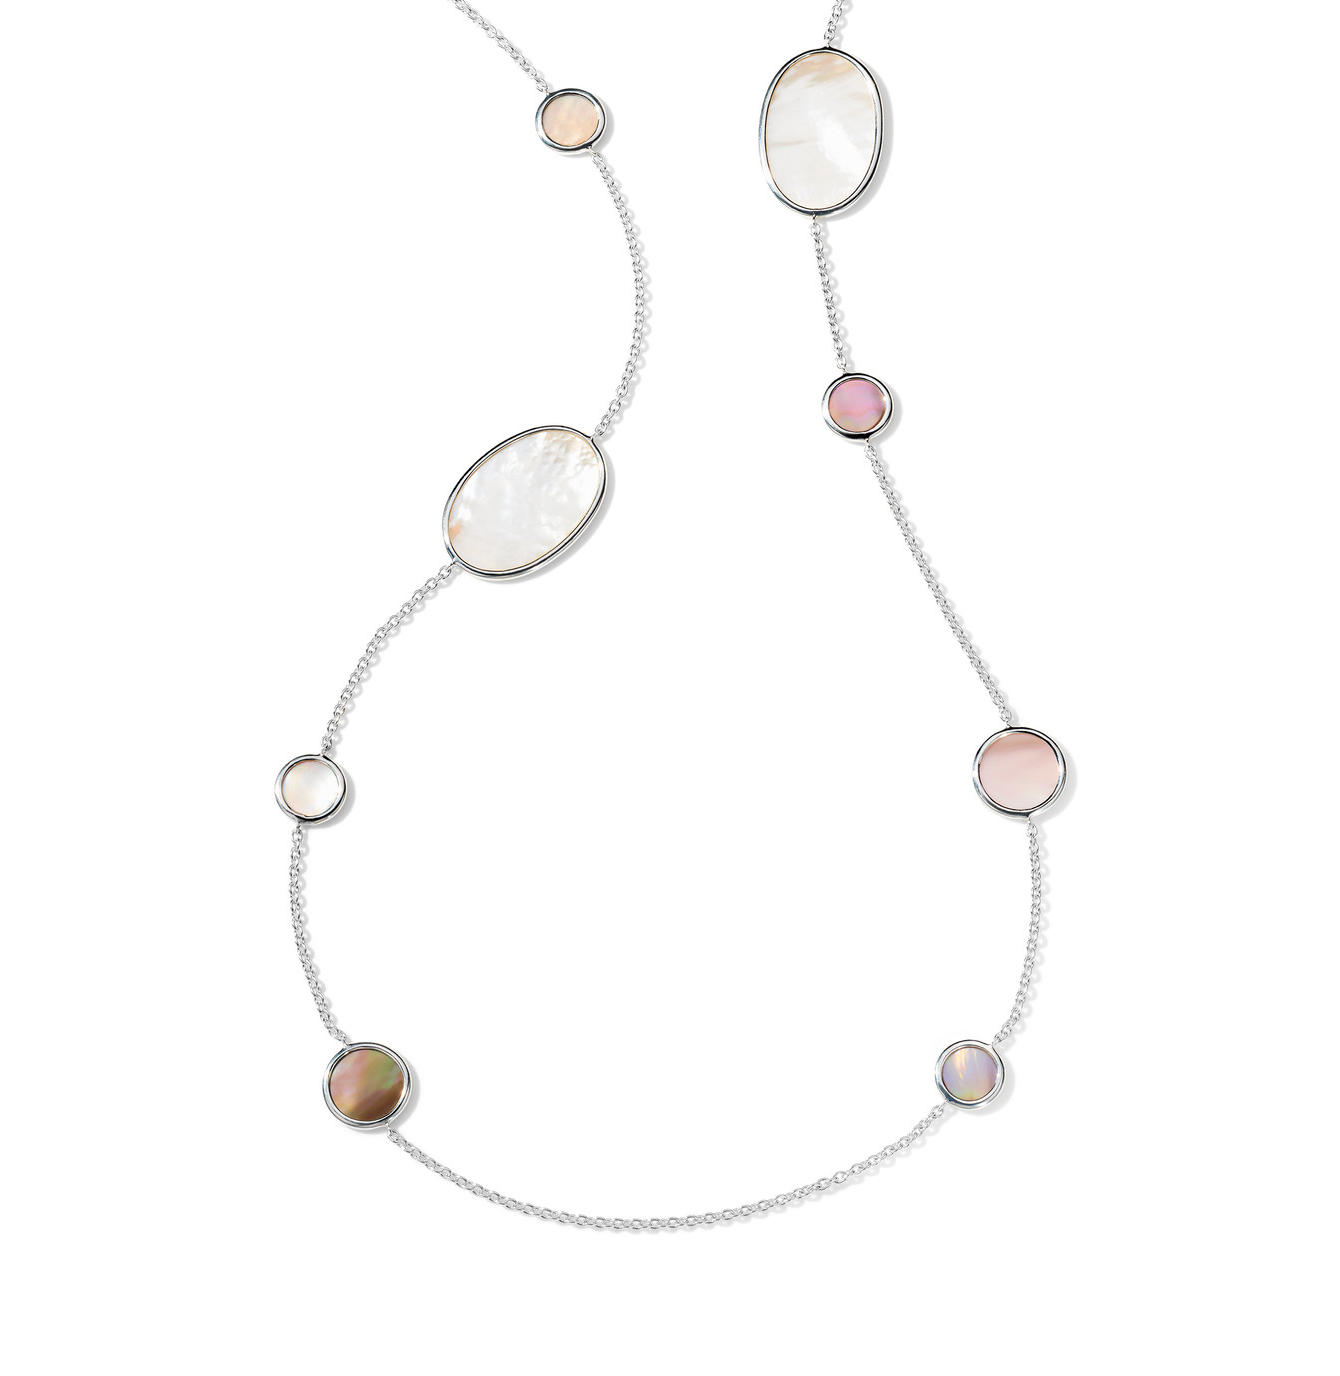 IPPOLITA Polished Rock Candy Sterling Silver Oval Station Necklace in Dahlia